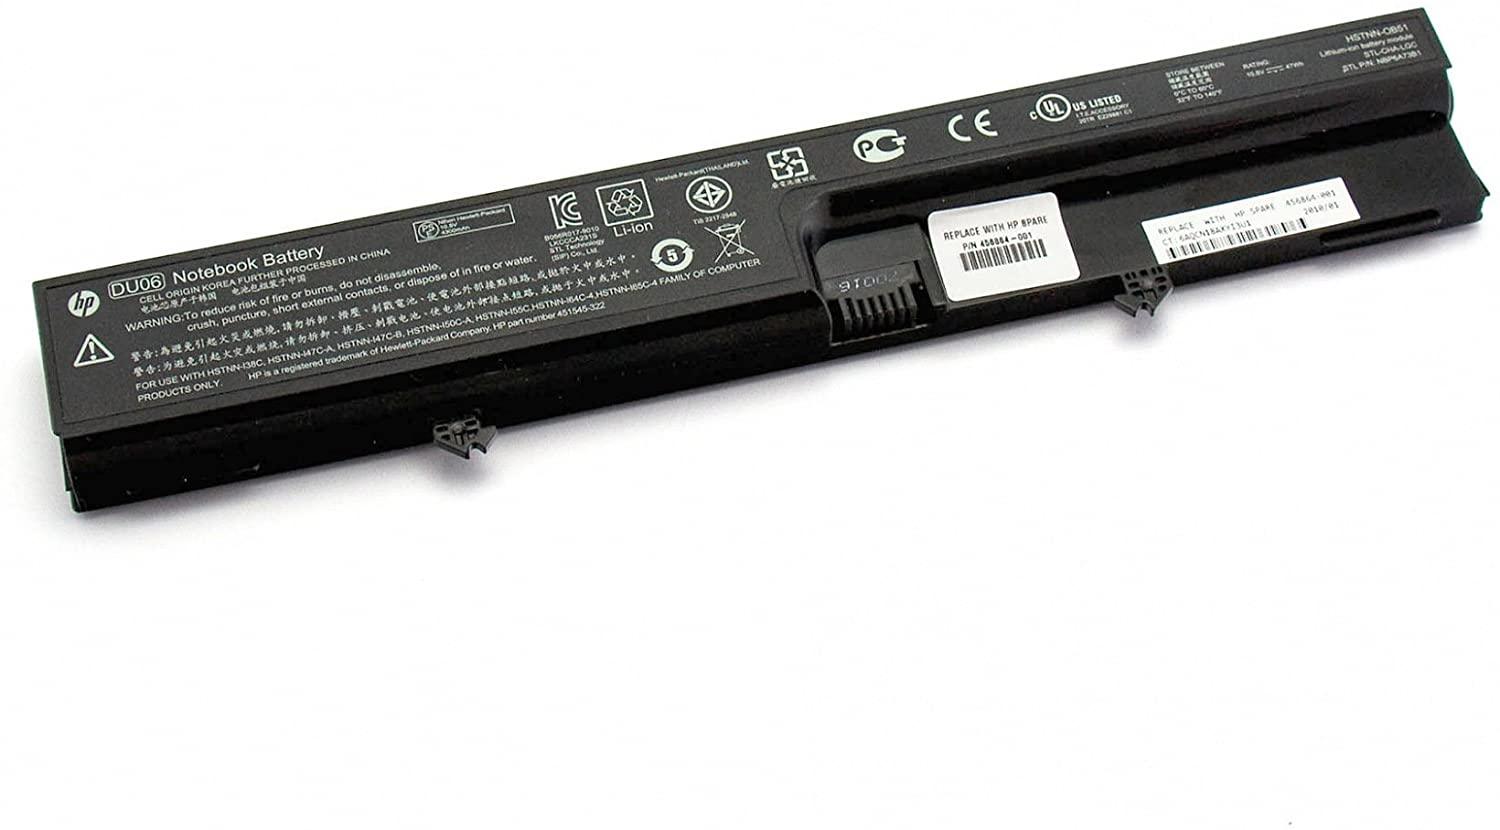 HP DU06 Laptop Battery For HP Compaq 6520s 510 511 515 516 540 541 6530s 6 Cells